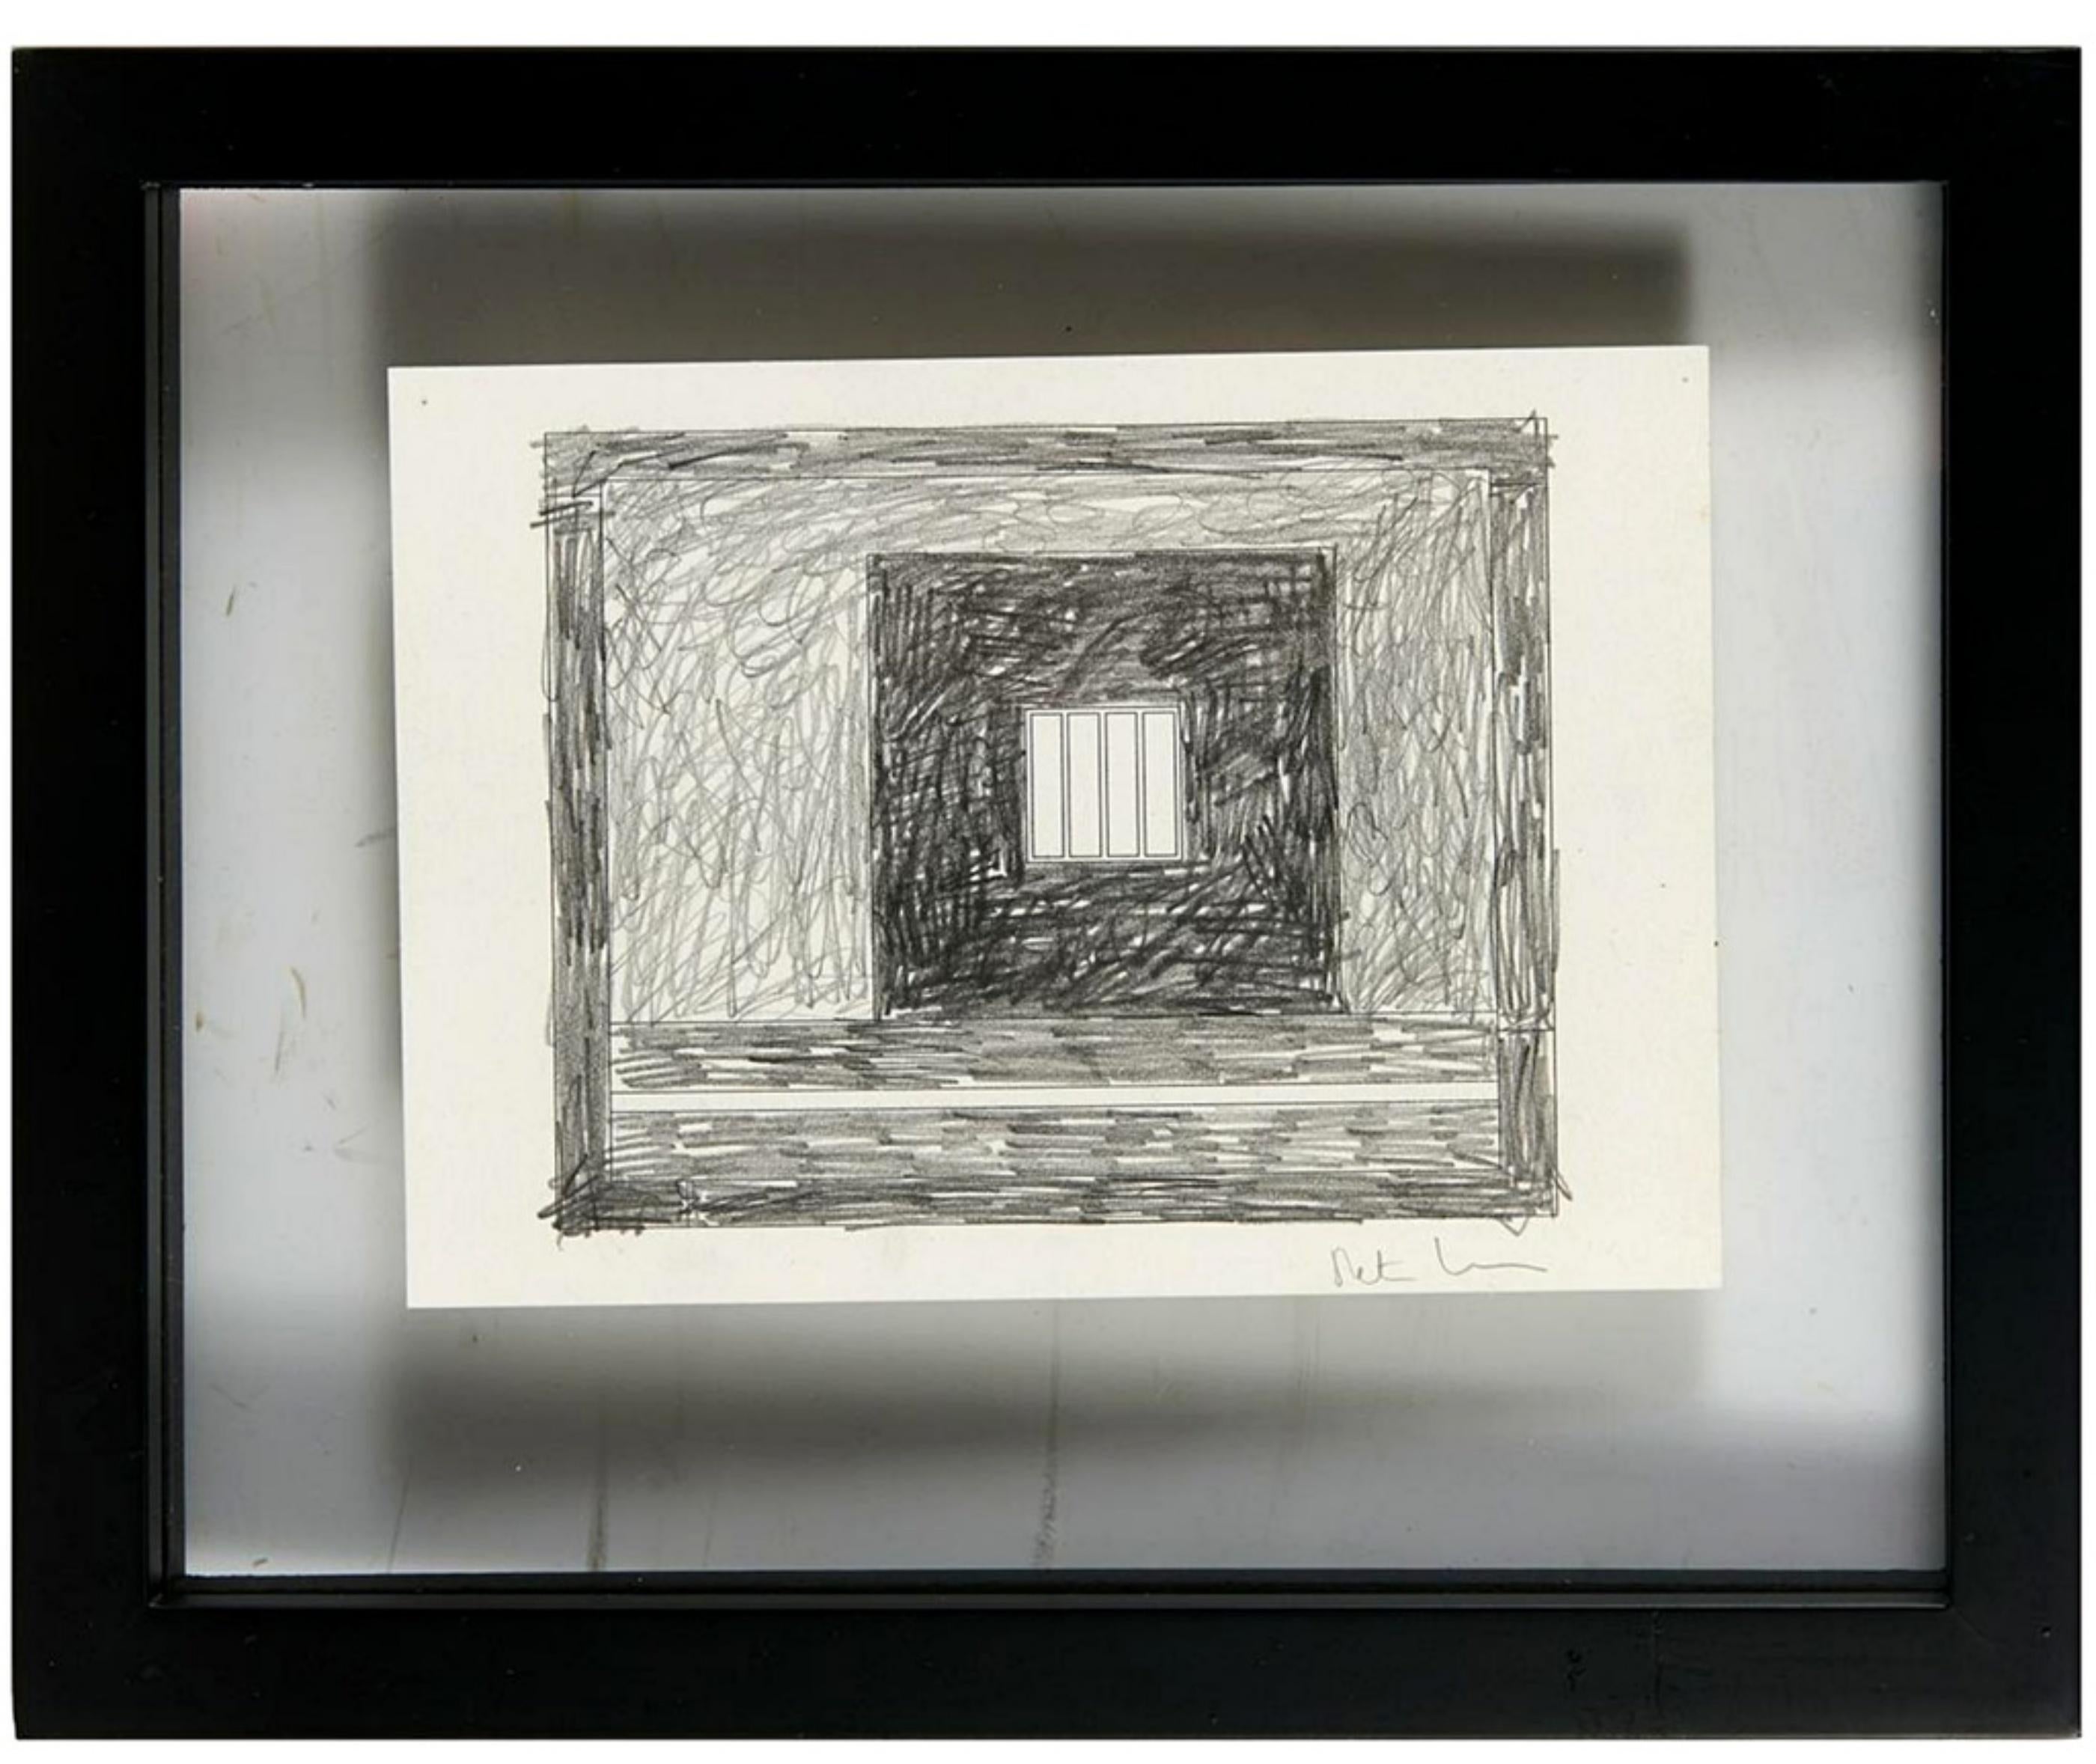 Prison 30, unique signed drawing 1990s by renowned contemporary artist, framed